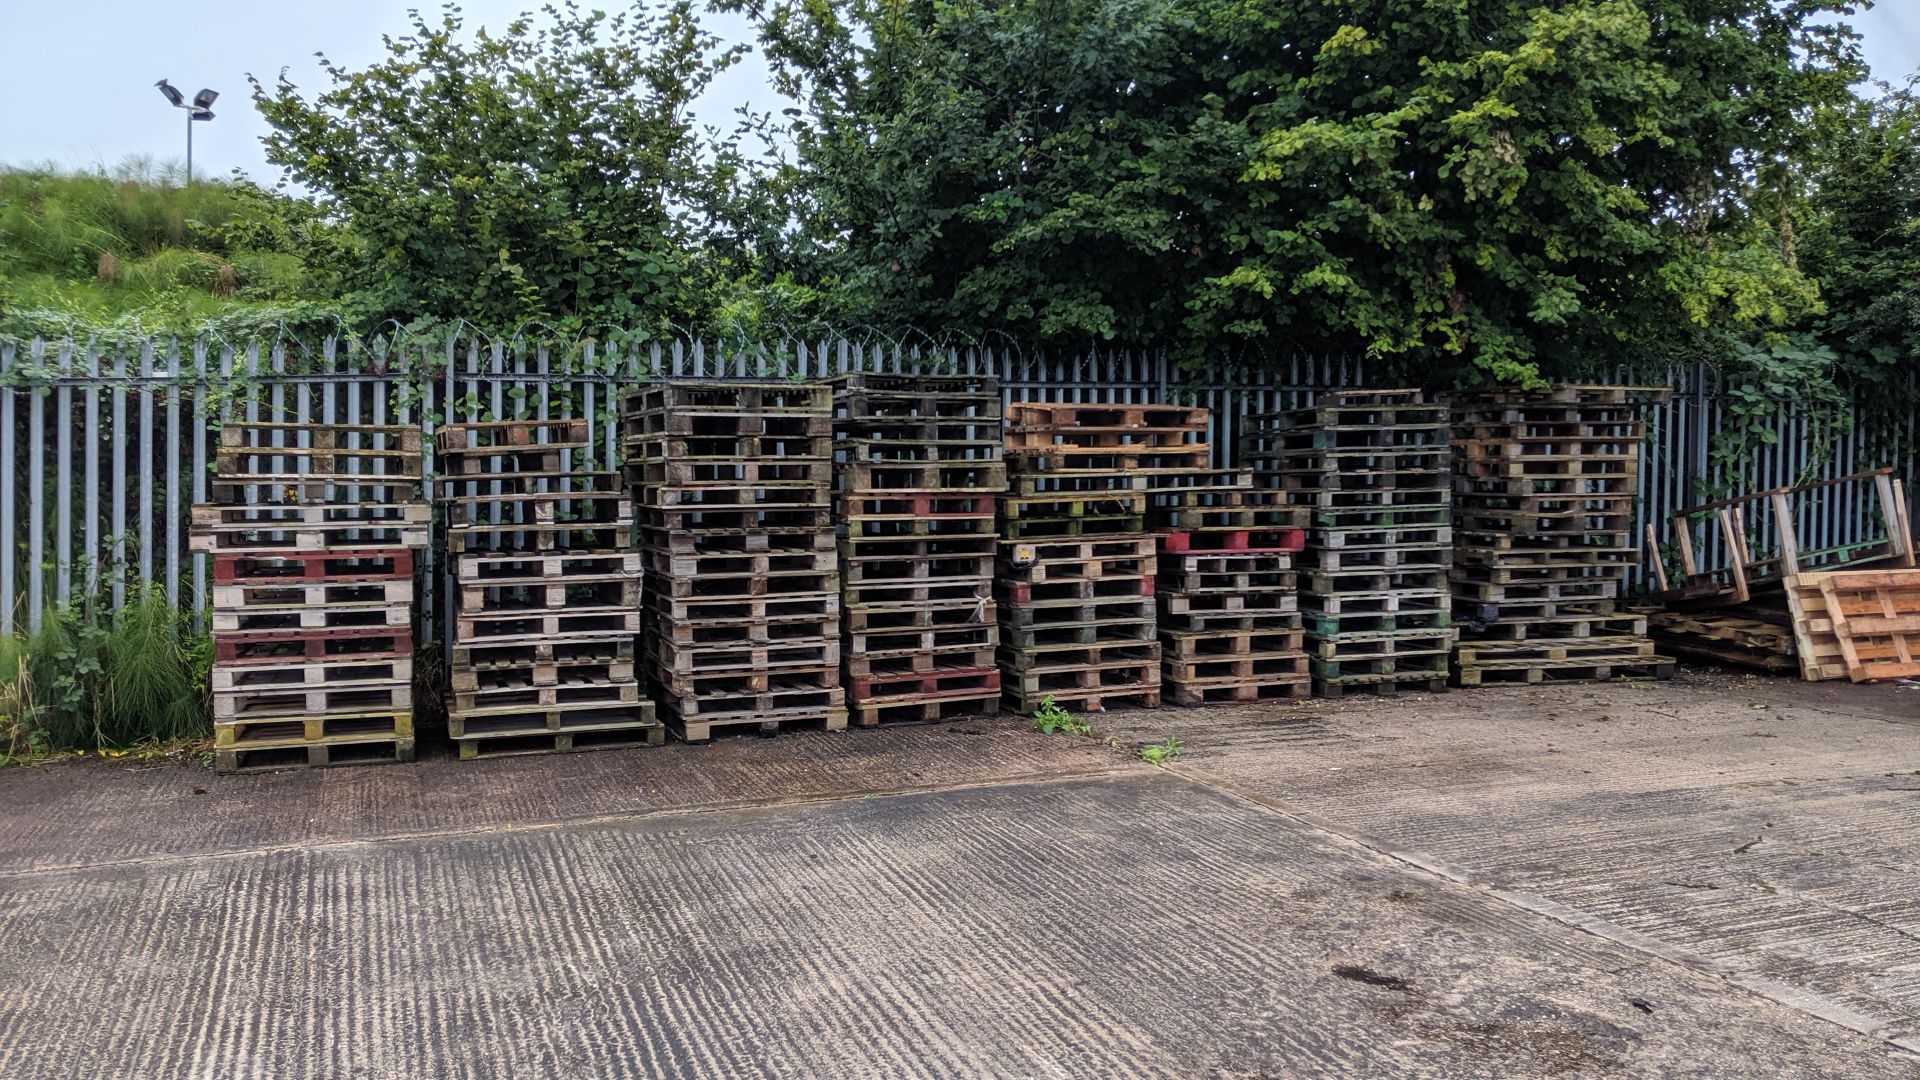 8 stacks of pallets - this lot consists of approx. 110 pallets in total. A strict condition of